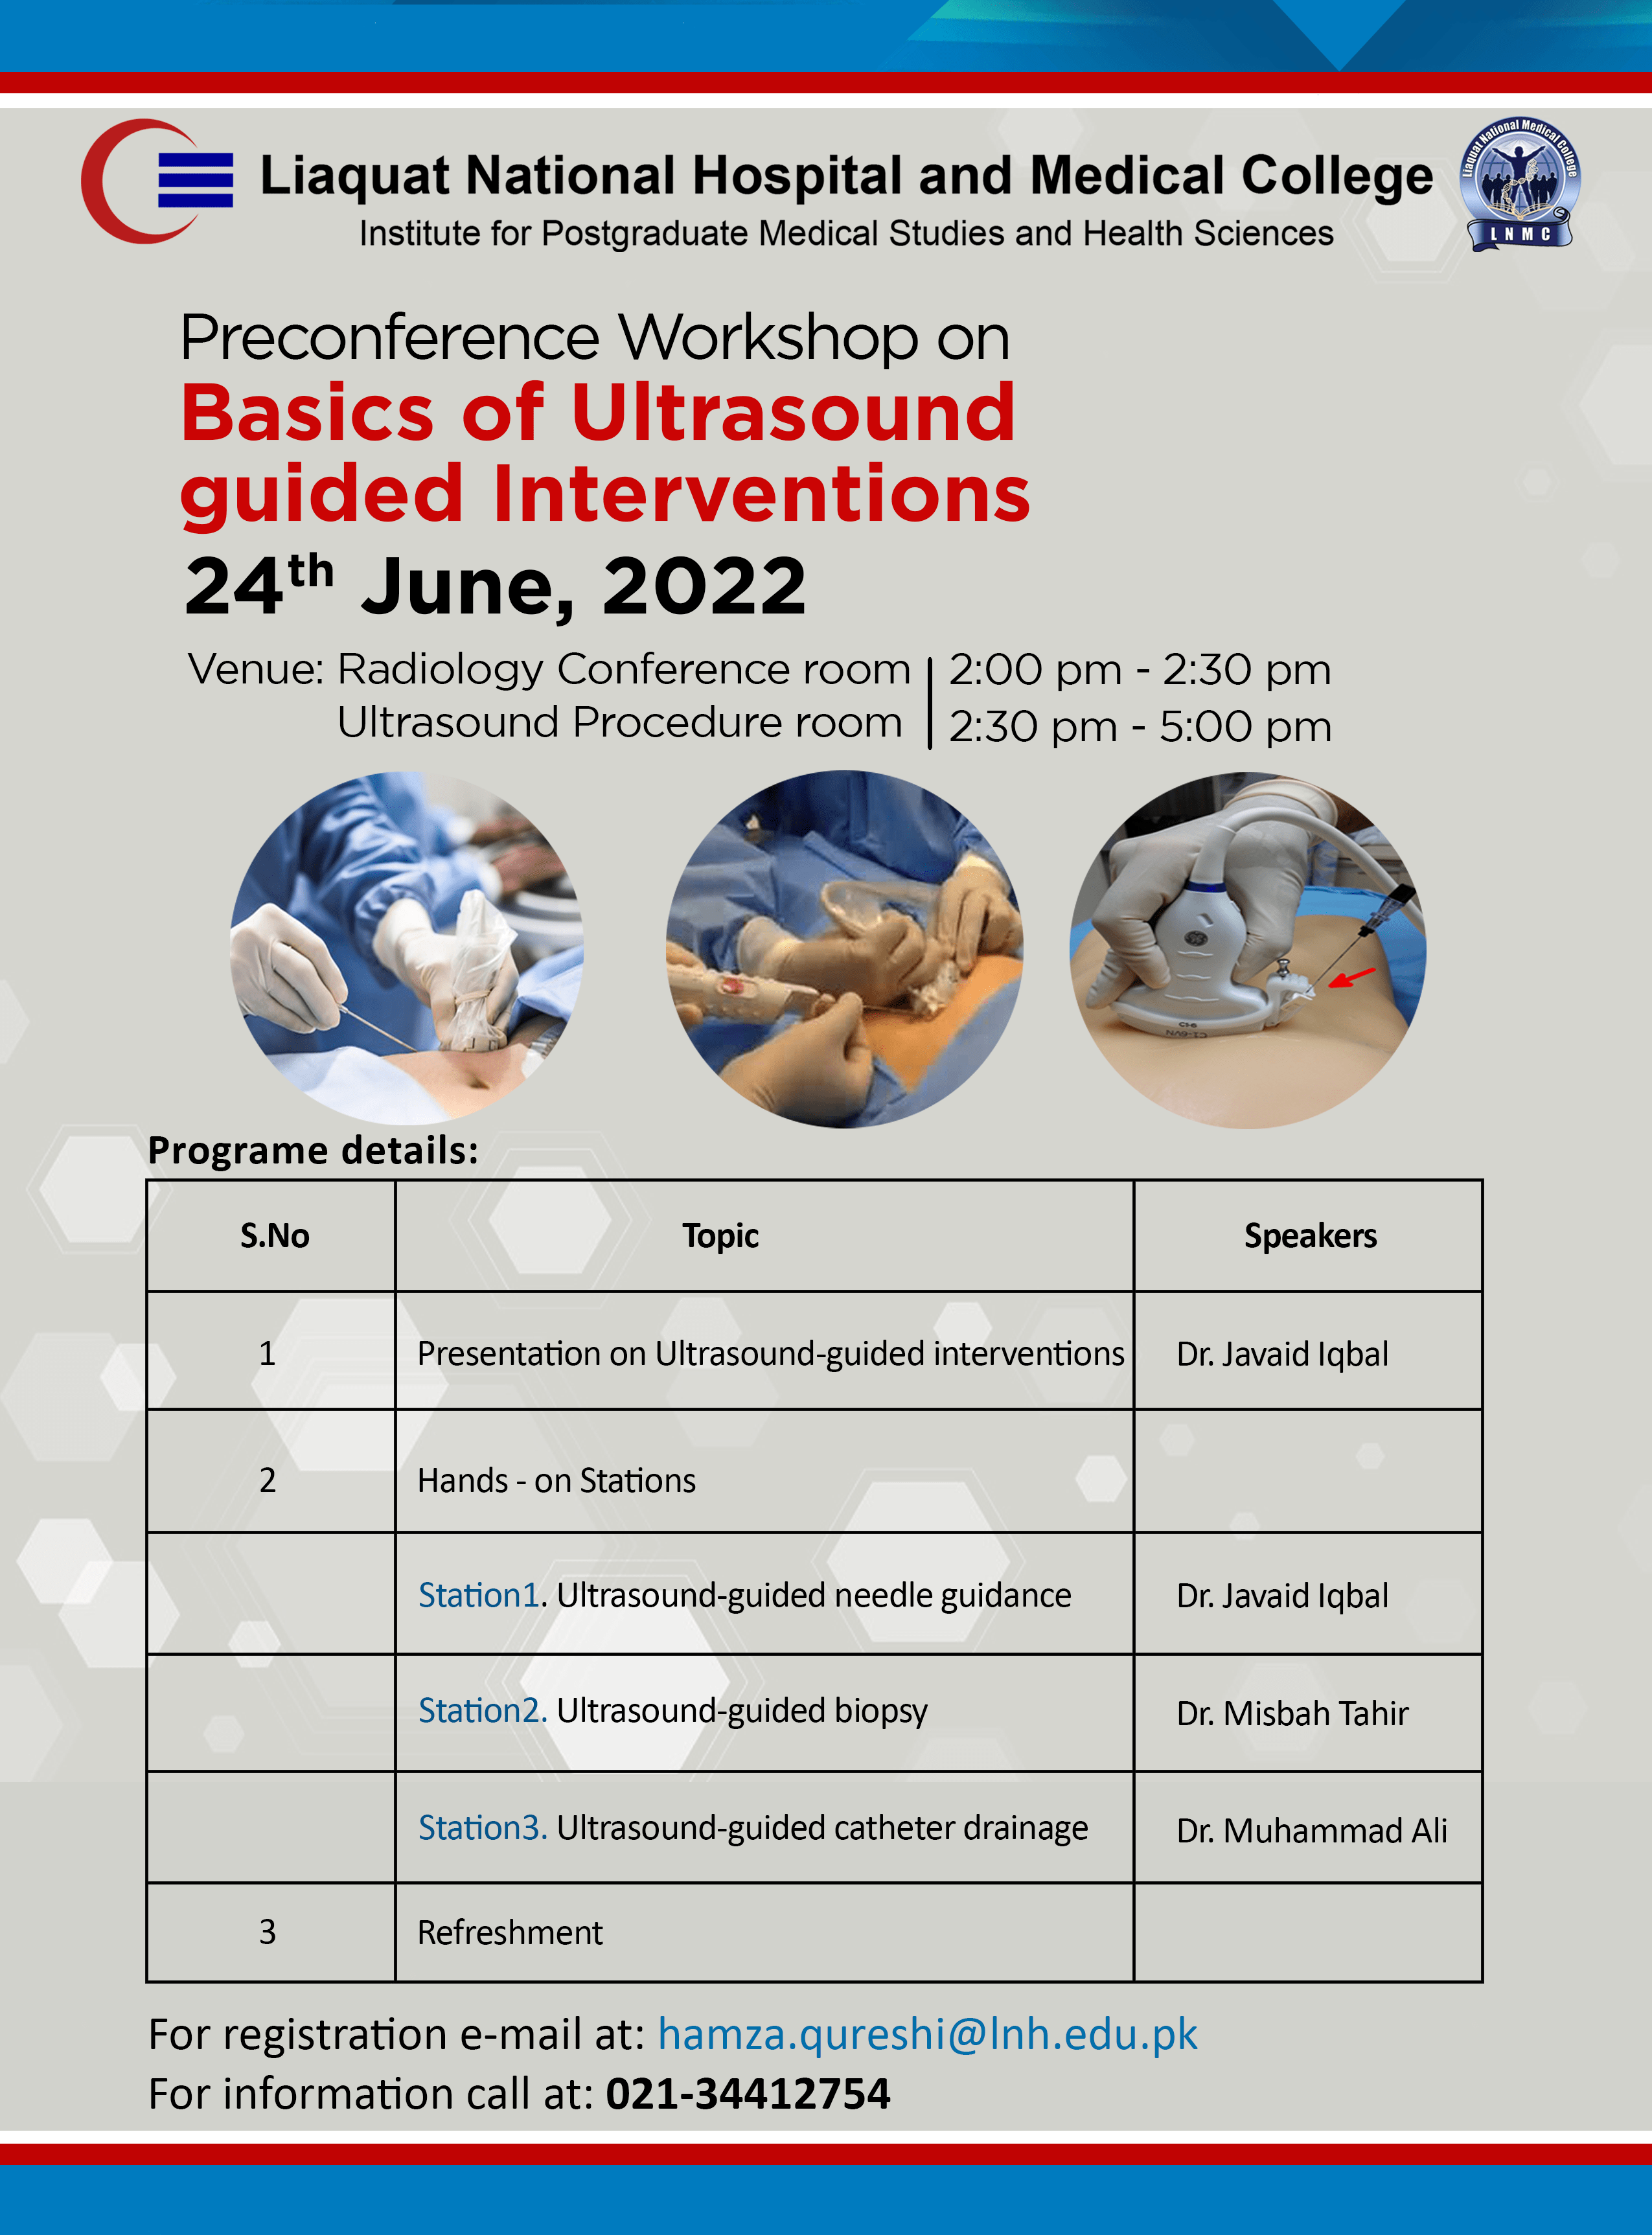 Preconference Workshop on Basics of Ultrasound guided Interventions